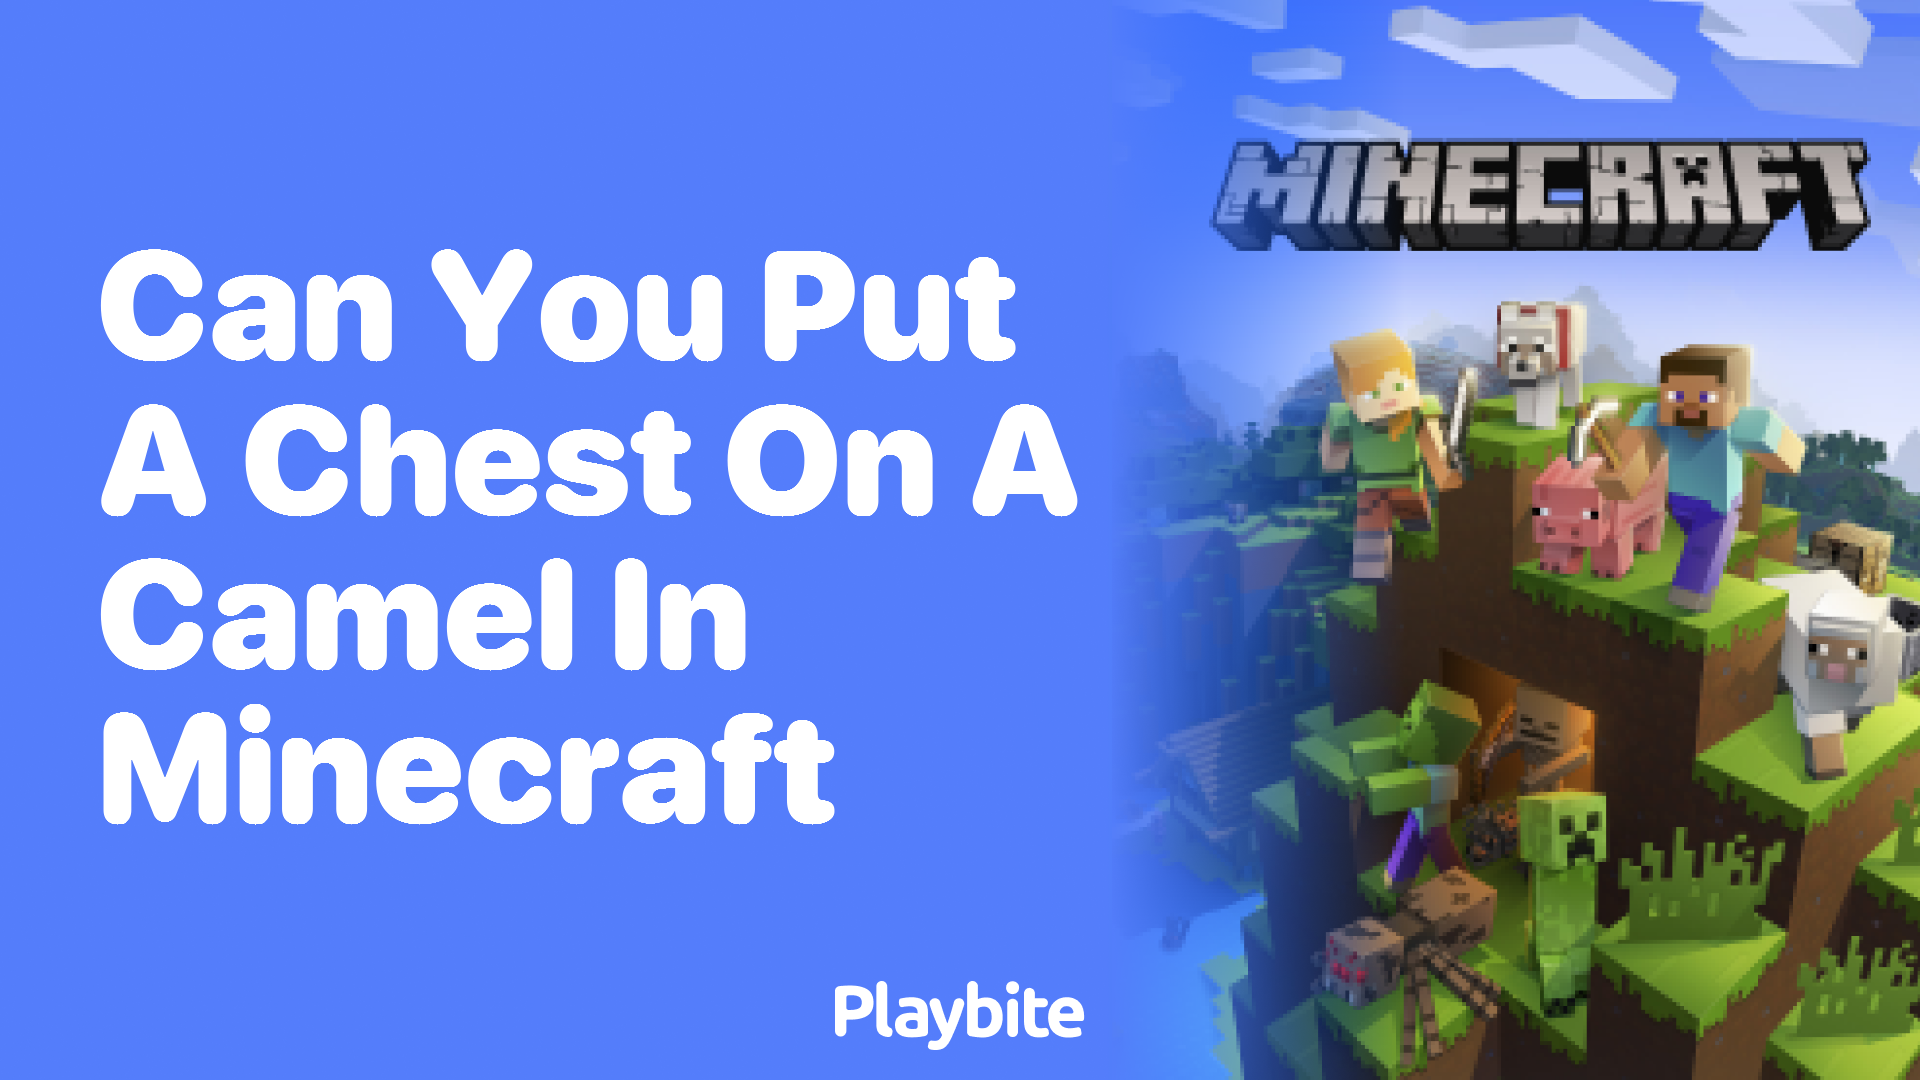 Can You Put a Chest on a Camel in Minecraft?